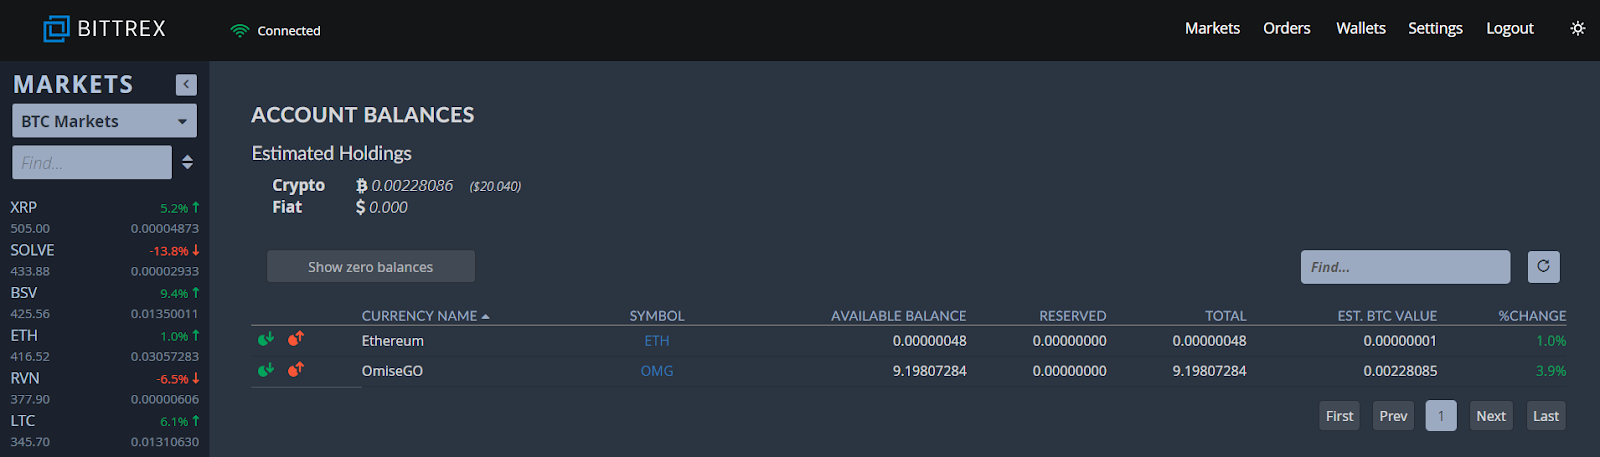 How to Use Bittrex in A Step-by-Step Guide (with Screenshots!)